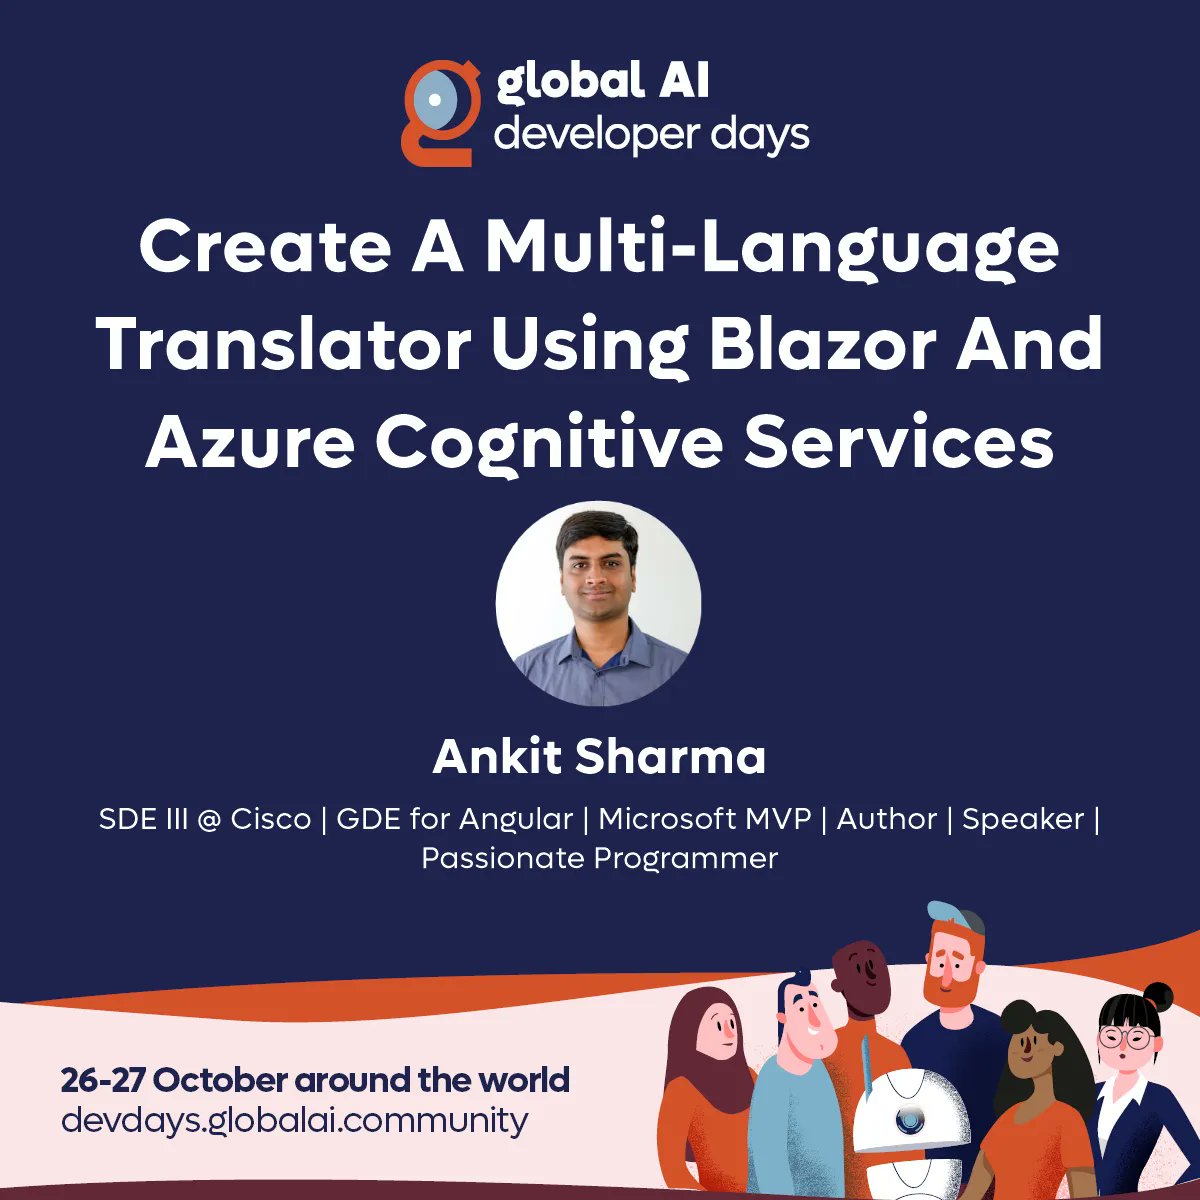 Join the #GlobalAIDeveloperDays this October for the #Hybrid #AI #Community event of the year! 📅 27 October | 06:30 UTC 🤩 Ankit Sharma (@ankitsharma_007) 📢 Create A Multi-Language Translator Using Blazor And Azure Cognitive Services Register now on: buff.ly/3Sm5cgG